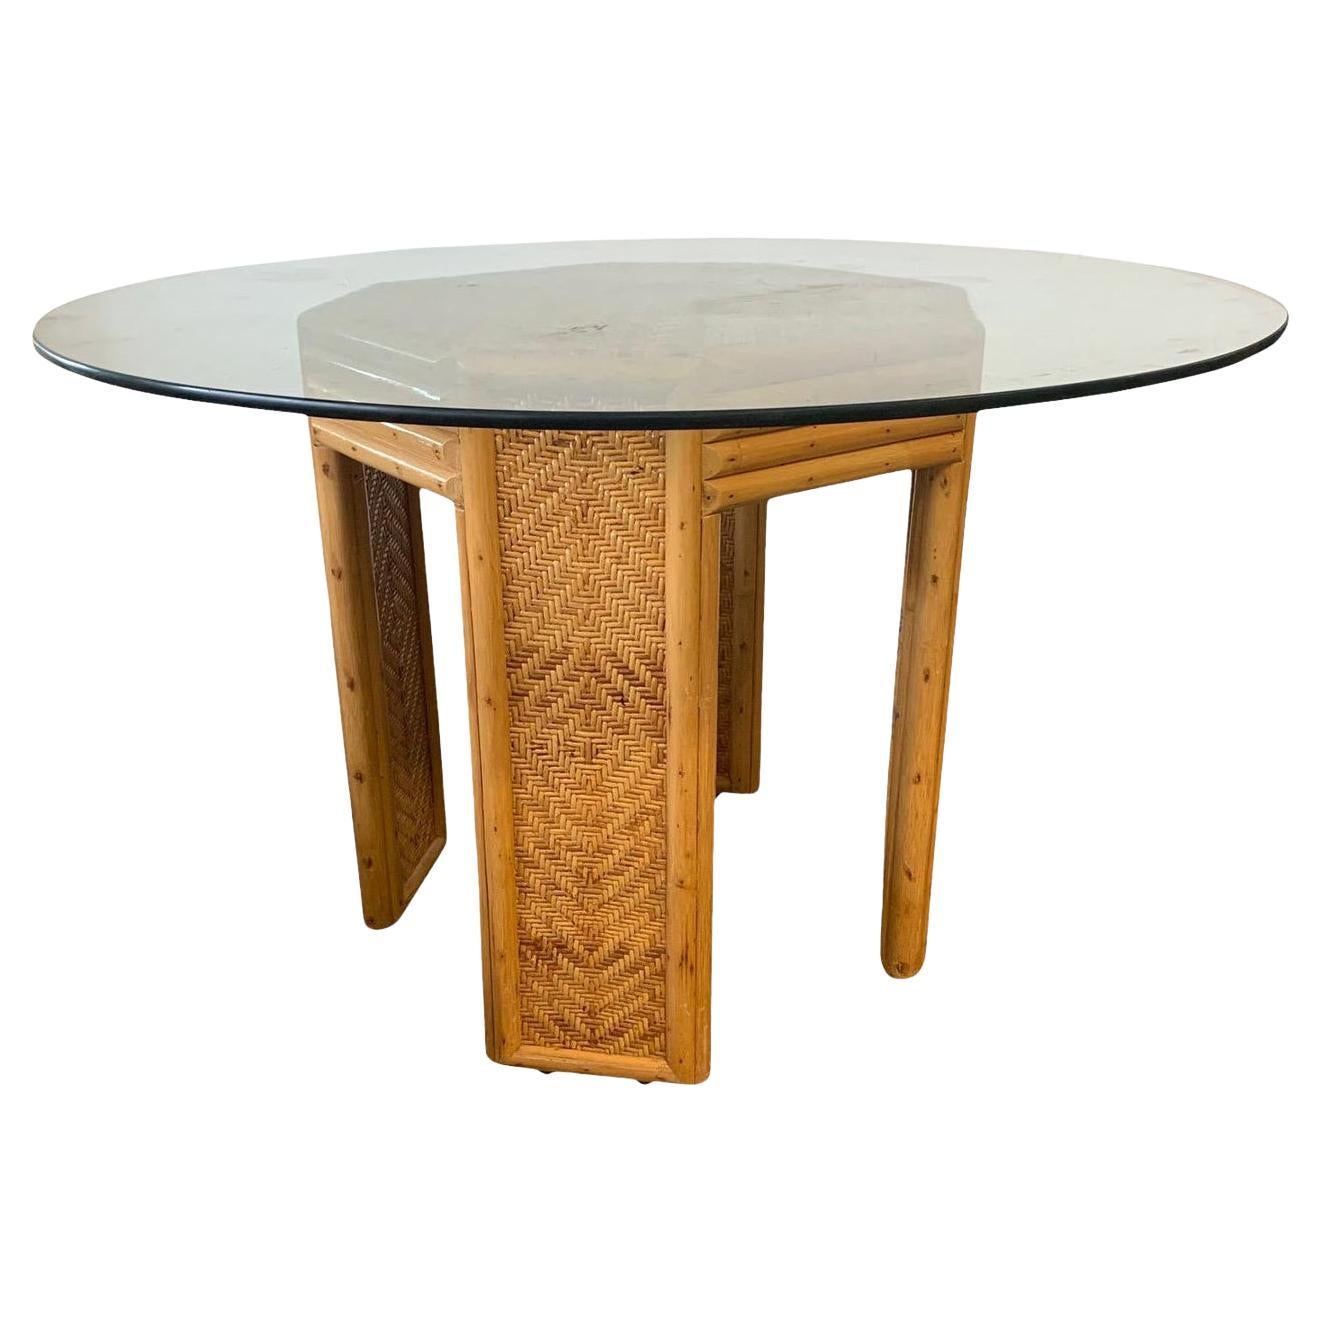 Vintage Woven Rattan Pedestal Dining Table For Sale